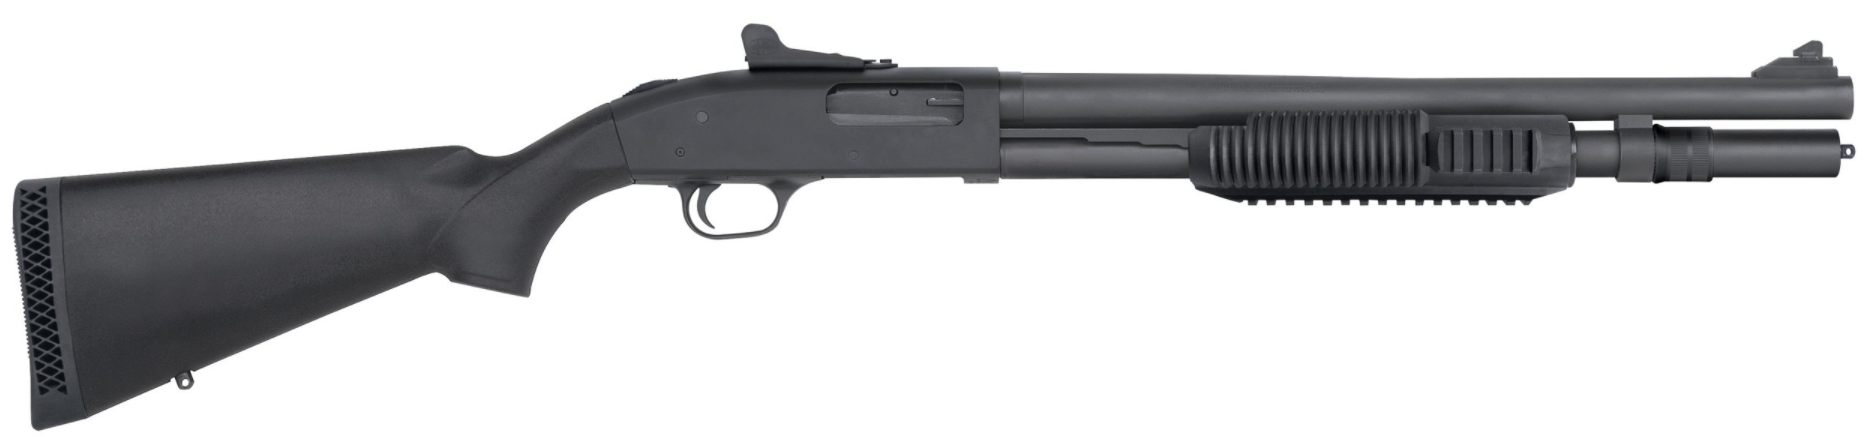 Mossberg 590A1 7 Shot Ghost Ring